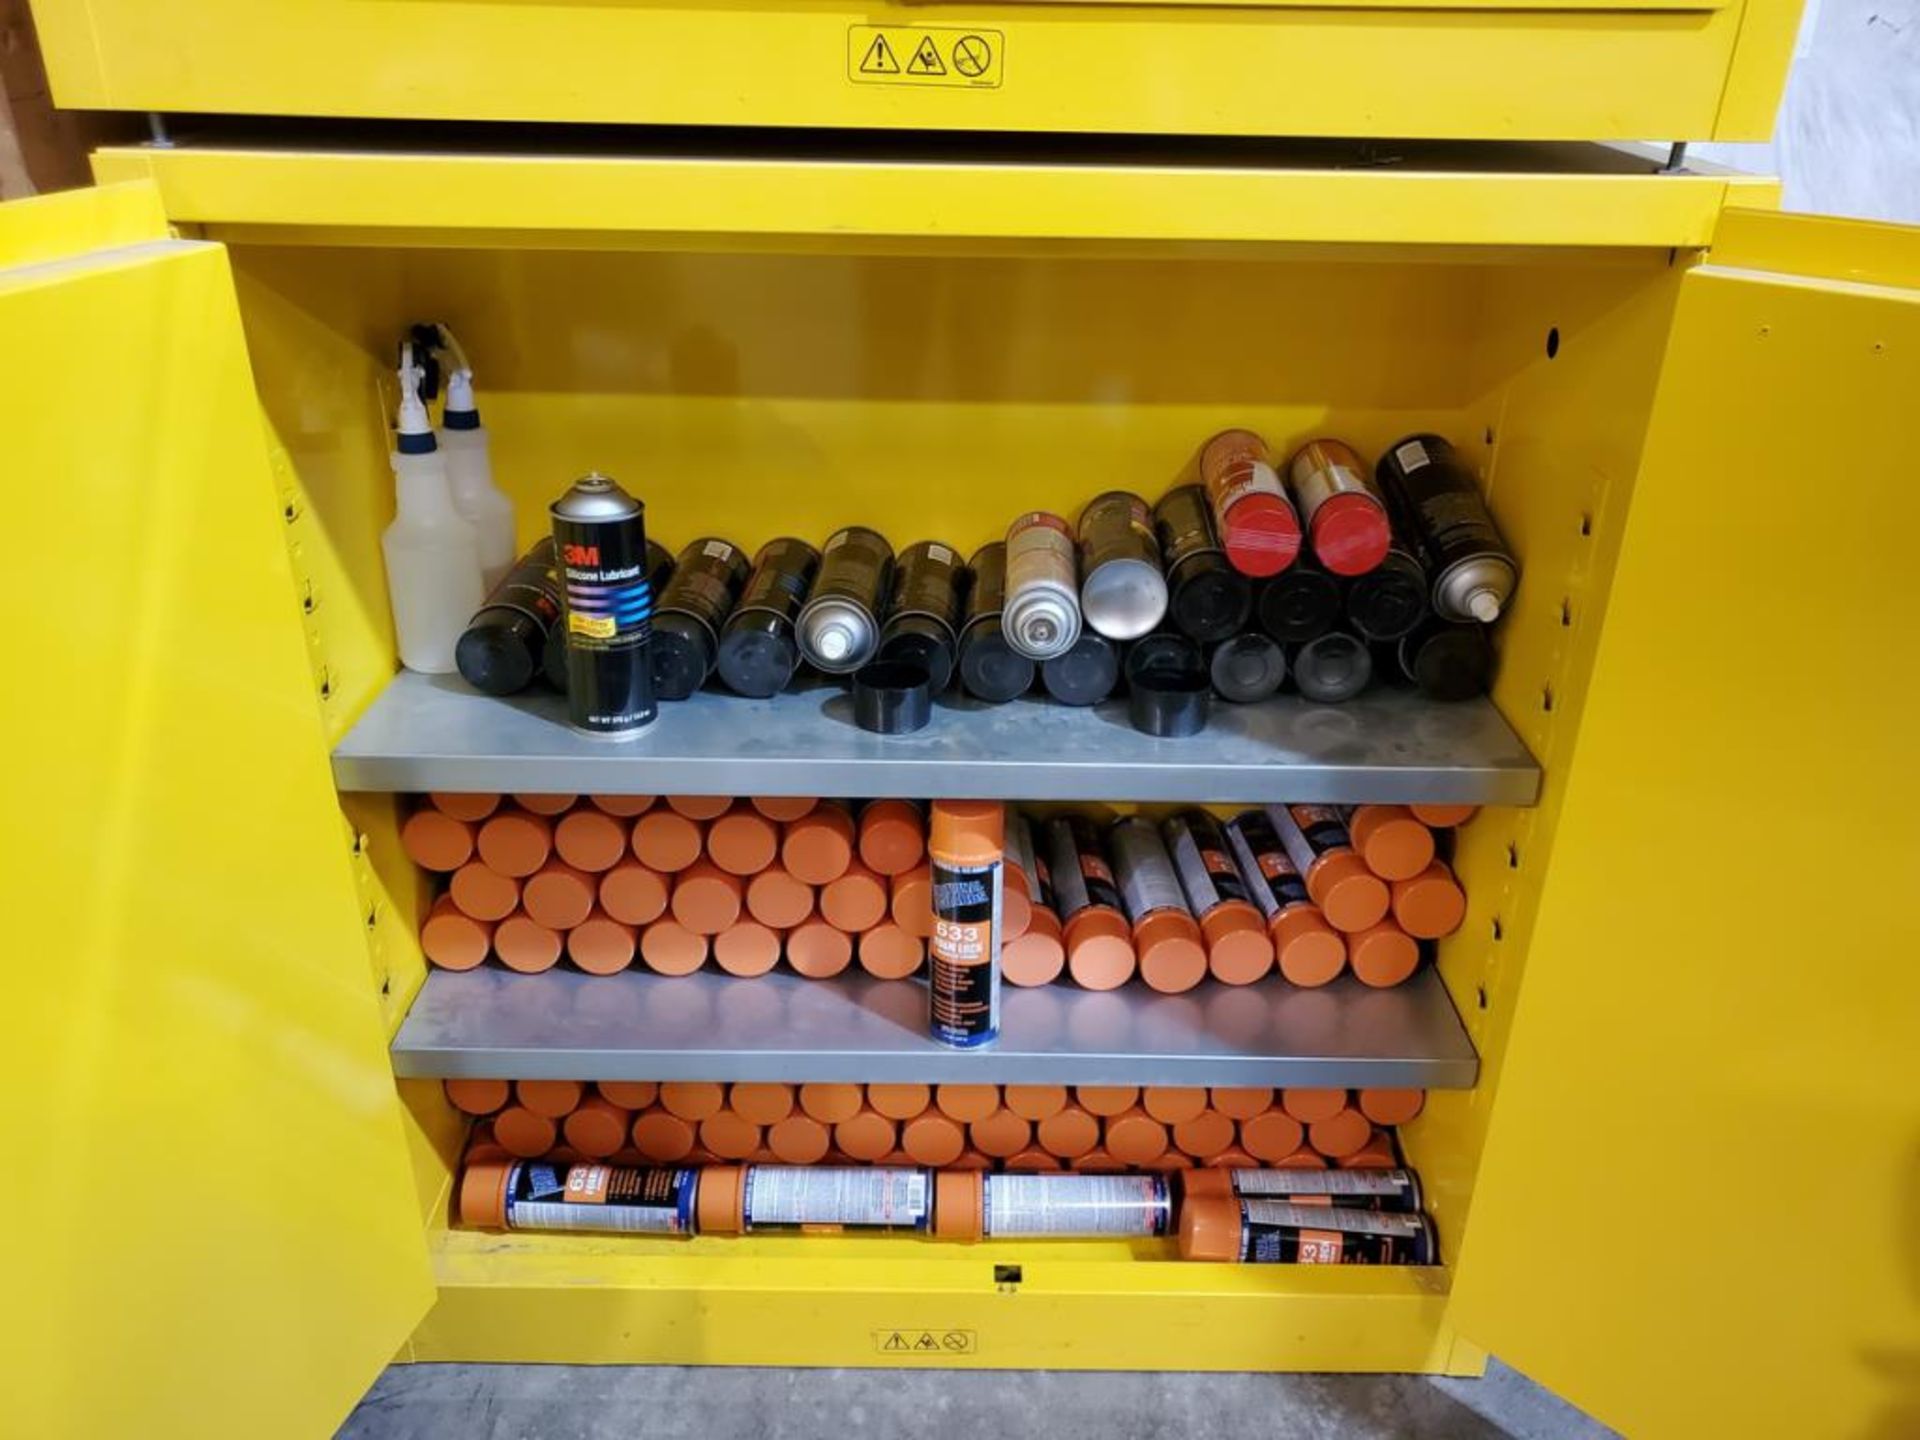 Standard Flammable Storage Cabinet - Image 3 of 3